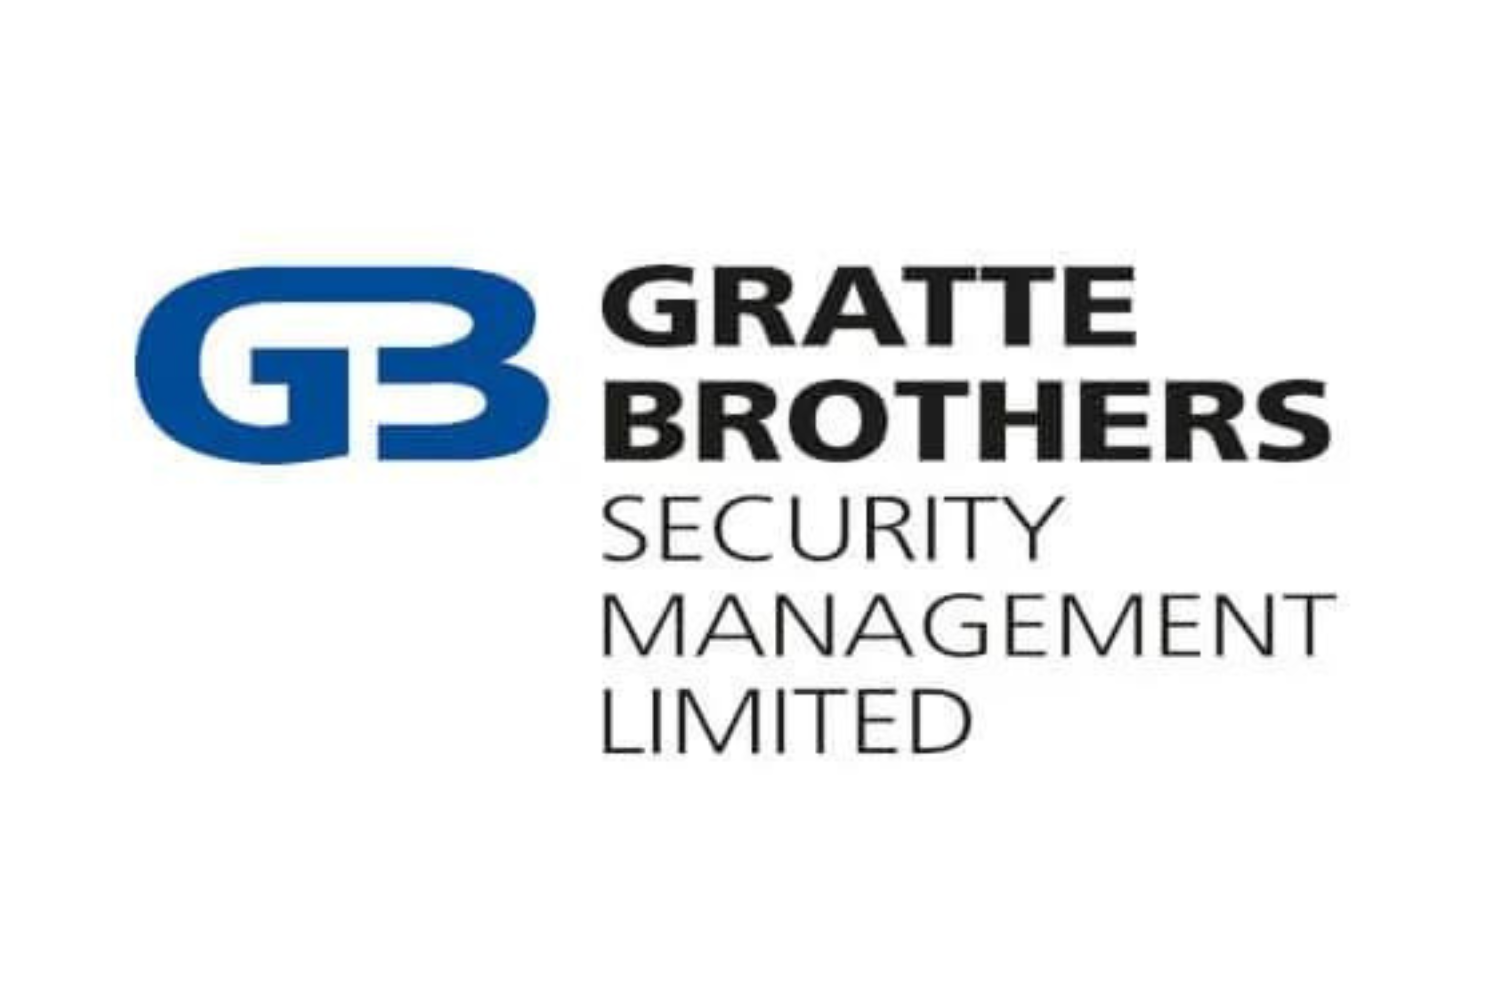 Gratte Brothers Security Management Limited